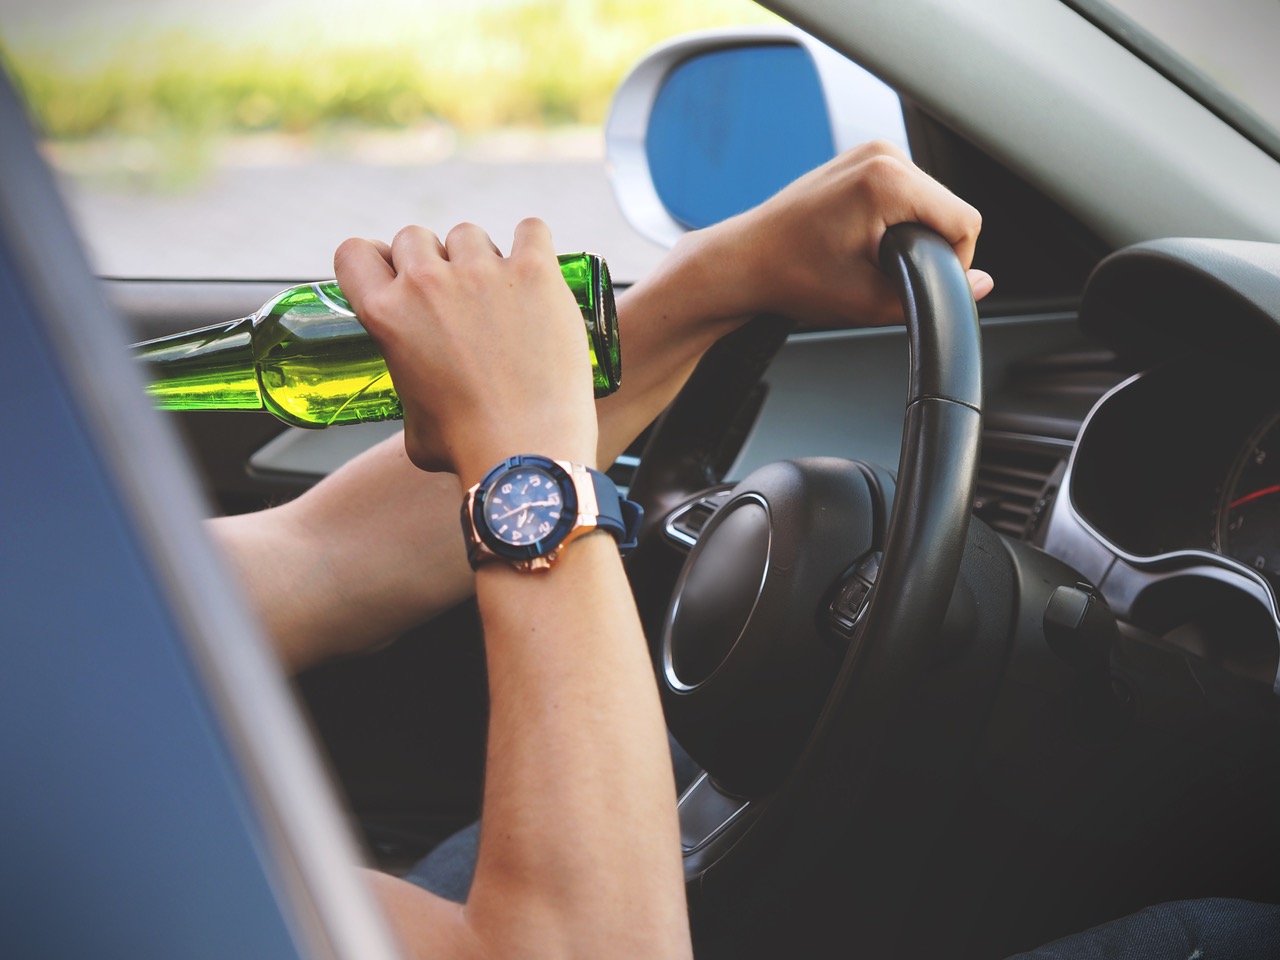 DUI - Driving under the influence charges in Minnesota - Get a defense attorney